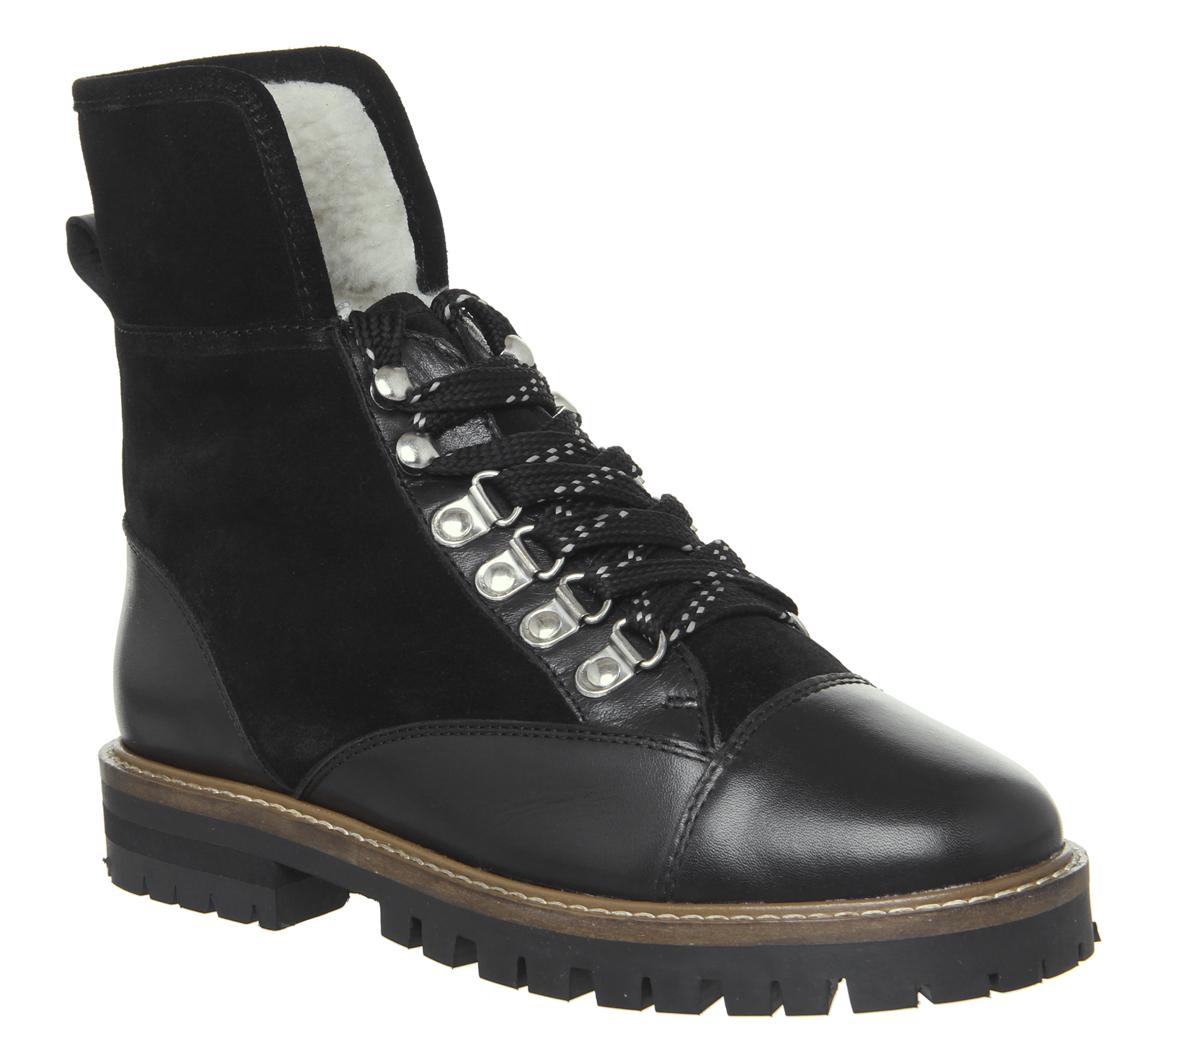 OFFICE Adams Furline Hiker Boots Black Suede Leather - Womens Boots